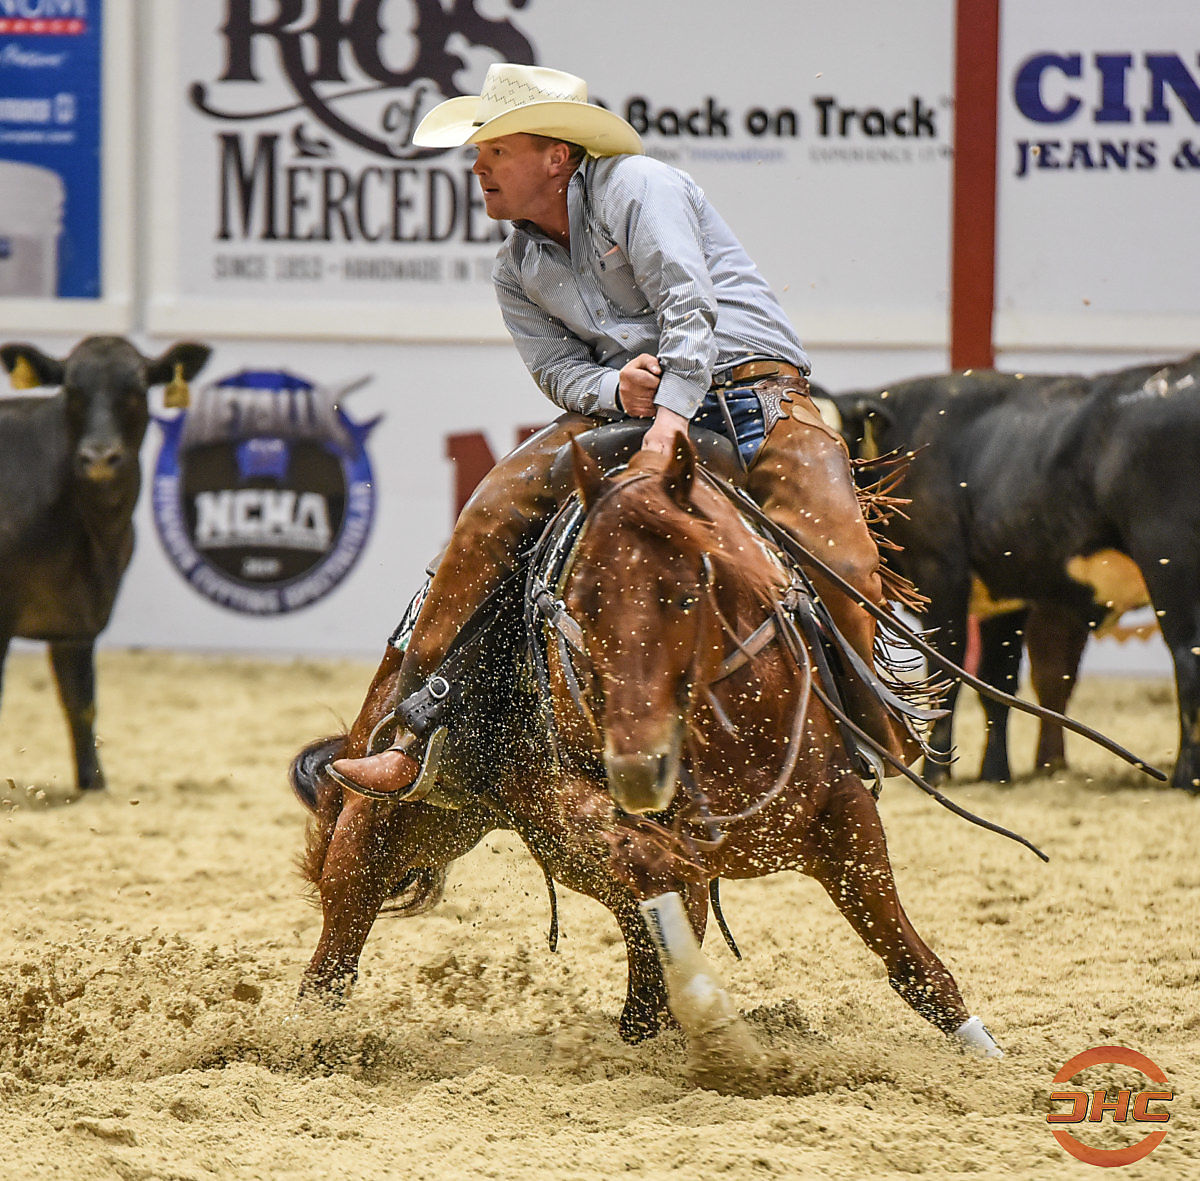 Thomas Bray Takes Home First Win at the NCHA Summer Spectacular